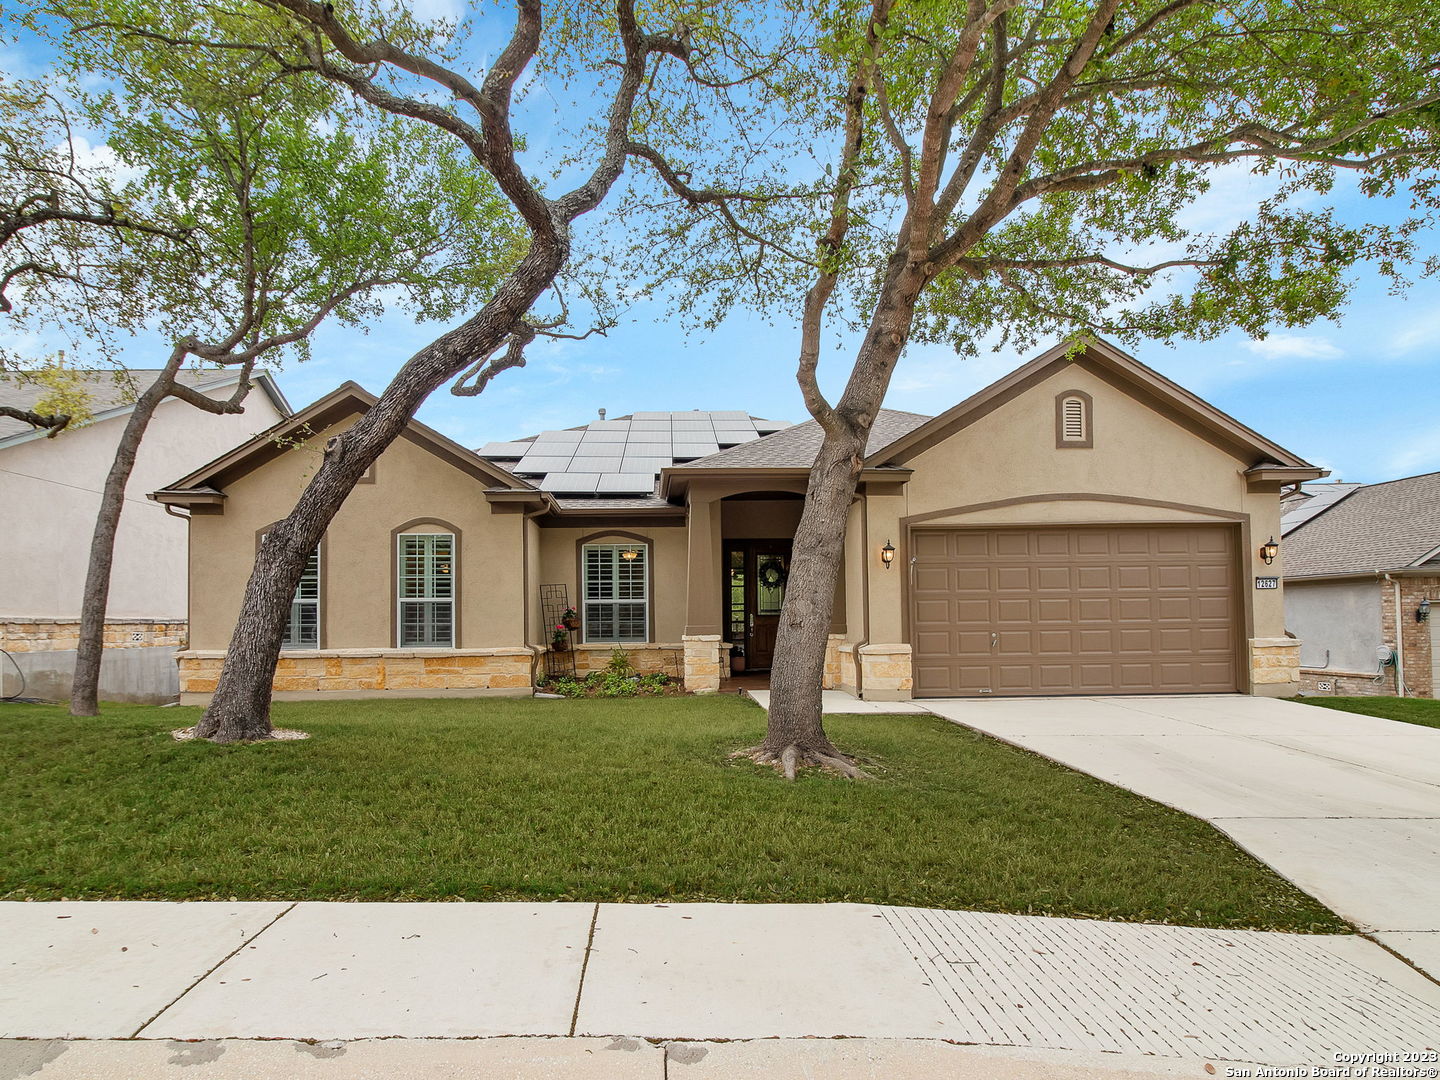 OPEN SATURDAY 3-18-23 1-3 PM. POSITIVELY STUNNING LIVE OAK MODEL BOASTING 2774 SQ/FT PLUS 1252 SQ/FT IN THE LOWER LEVEL. 11 FOOT CEILINGS, 8 FOOT SOLID CORE DOORS, 3 BEDROOMS, 2.5 BATHS, FLEX ROOM, LIBRARY, FORMAL DINING, GAS FIREPLACE, SPACIOUS KITCHEN WITH GRANITE COUNTER TOPS.  THE BREAKFAST BAY HAS GORGEOUS VIEWS OF THE FABULOUS GREENBELT LOT WITH ACCESS TO WALKING TRAILS.  THE COVERED TREX PATIO AND DECK WITH RETRACTABLE AWNING IS PERFECT FOR MORNING COFFEE OR EVENING WINE WHILE WATCHING WILDLIFE. BEAUTIFUL WOOD FLOORS, CUSTOM WINDOW TREATMENTS, OVERSIZED GARAGE AND ADDED BONUS ARE SOLAR PANELS FOR LOW UTILITY BILLS! THIS BEAUTIFUL HOME IS ON A CUL DE SAC WITH FRONT VIEWS OF A GREEN BELT. THIS IS IN DEL WEBB'S PREMIER 55+ active ADULT COMMUNITY FEATURING STATE OF THE ART GYM, BILLIARDS, INDOOR & OUTDOOR POOLS & HOT TUBS, BOCCE BALL, PICKLE BALL AND TENNIS. PACK YOUR BAGS AND COME INJOY THE GOOD LIFE!